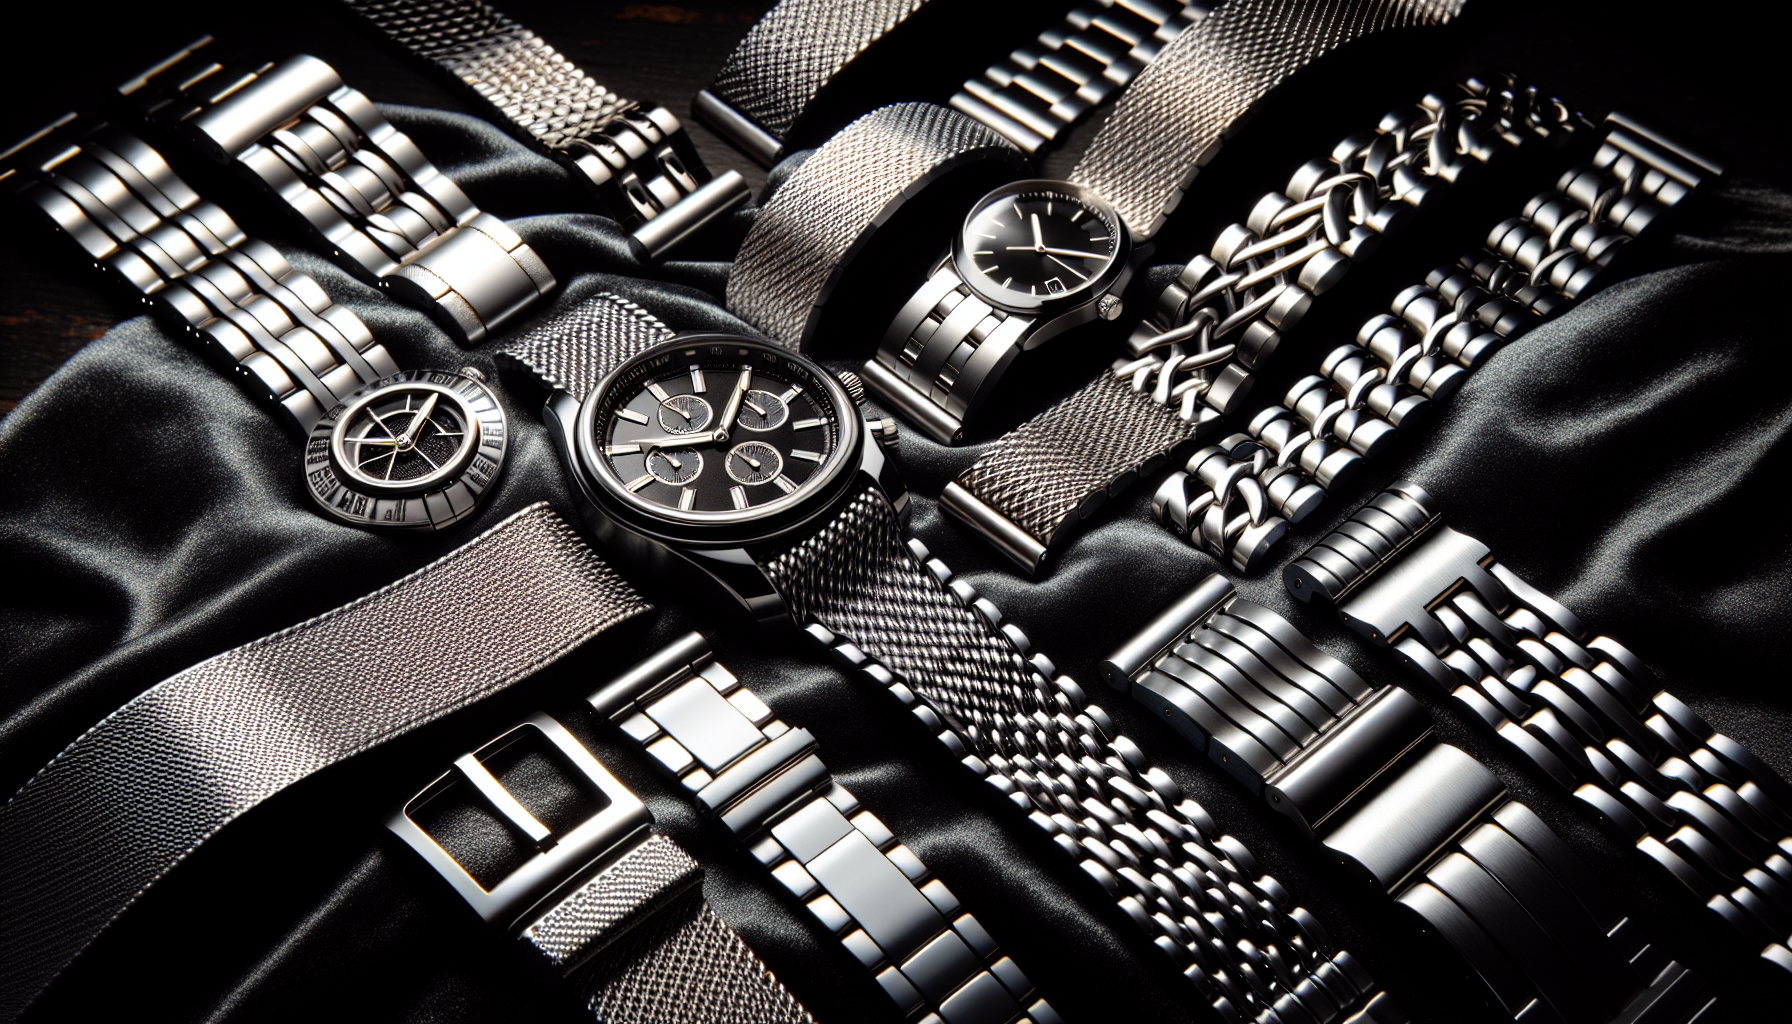 Variety of stainless steel watch straps